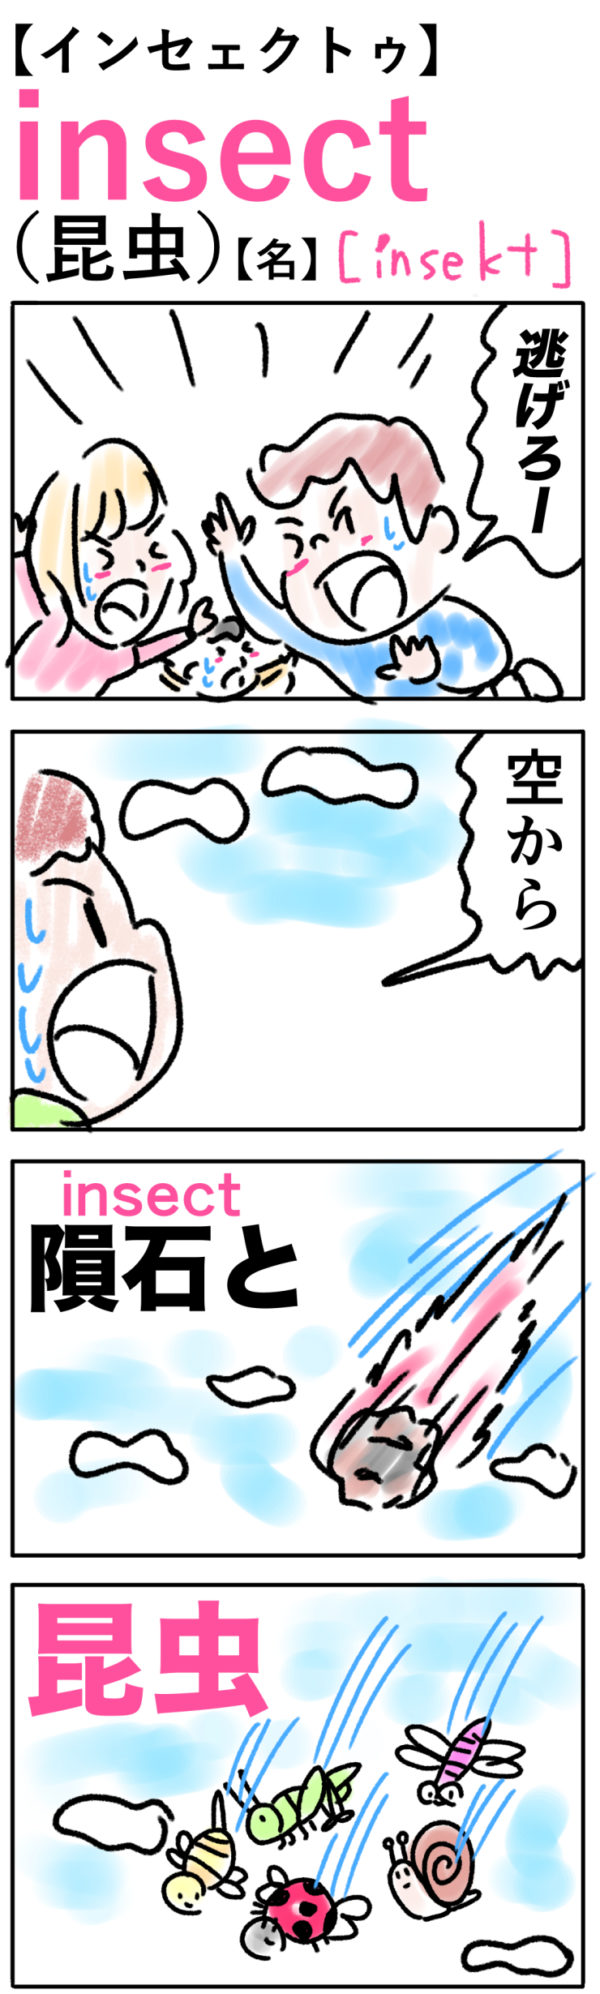 insectの覚え方